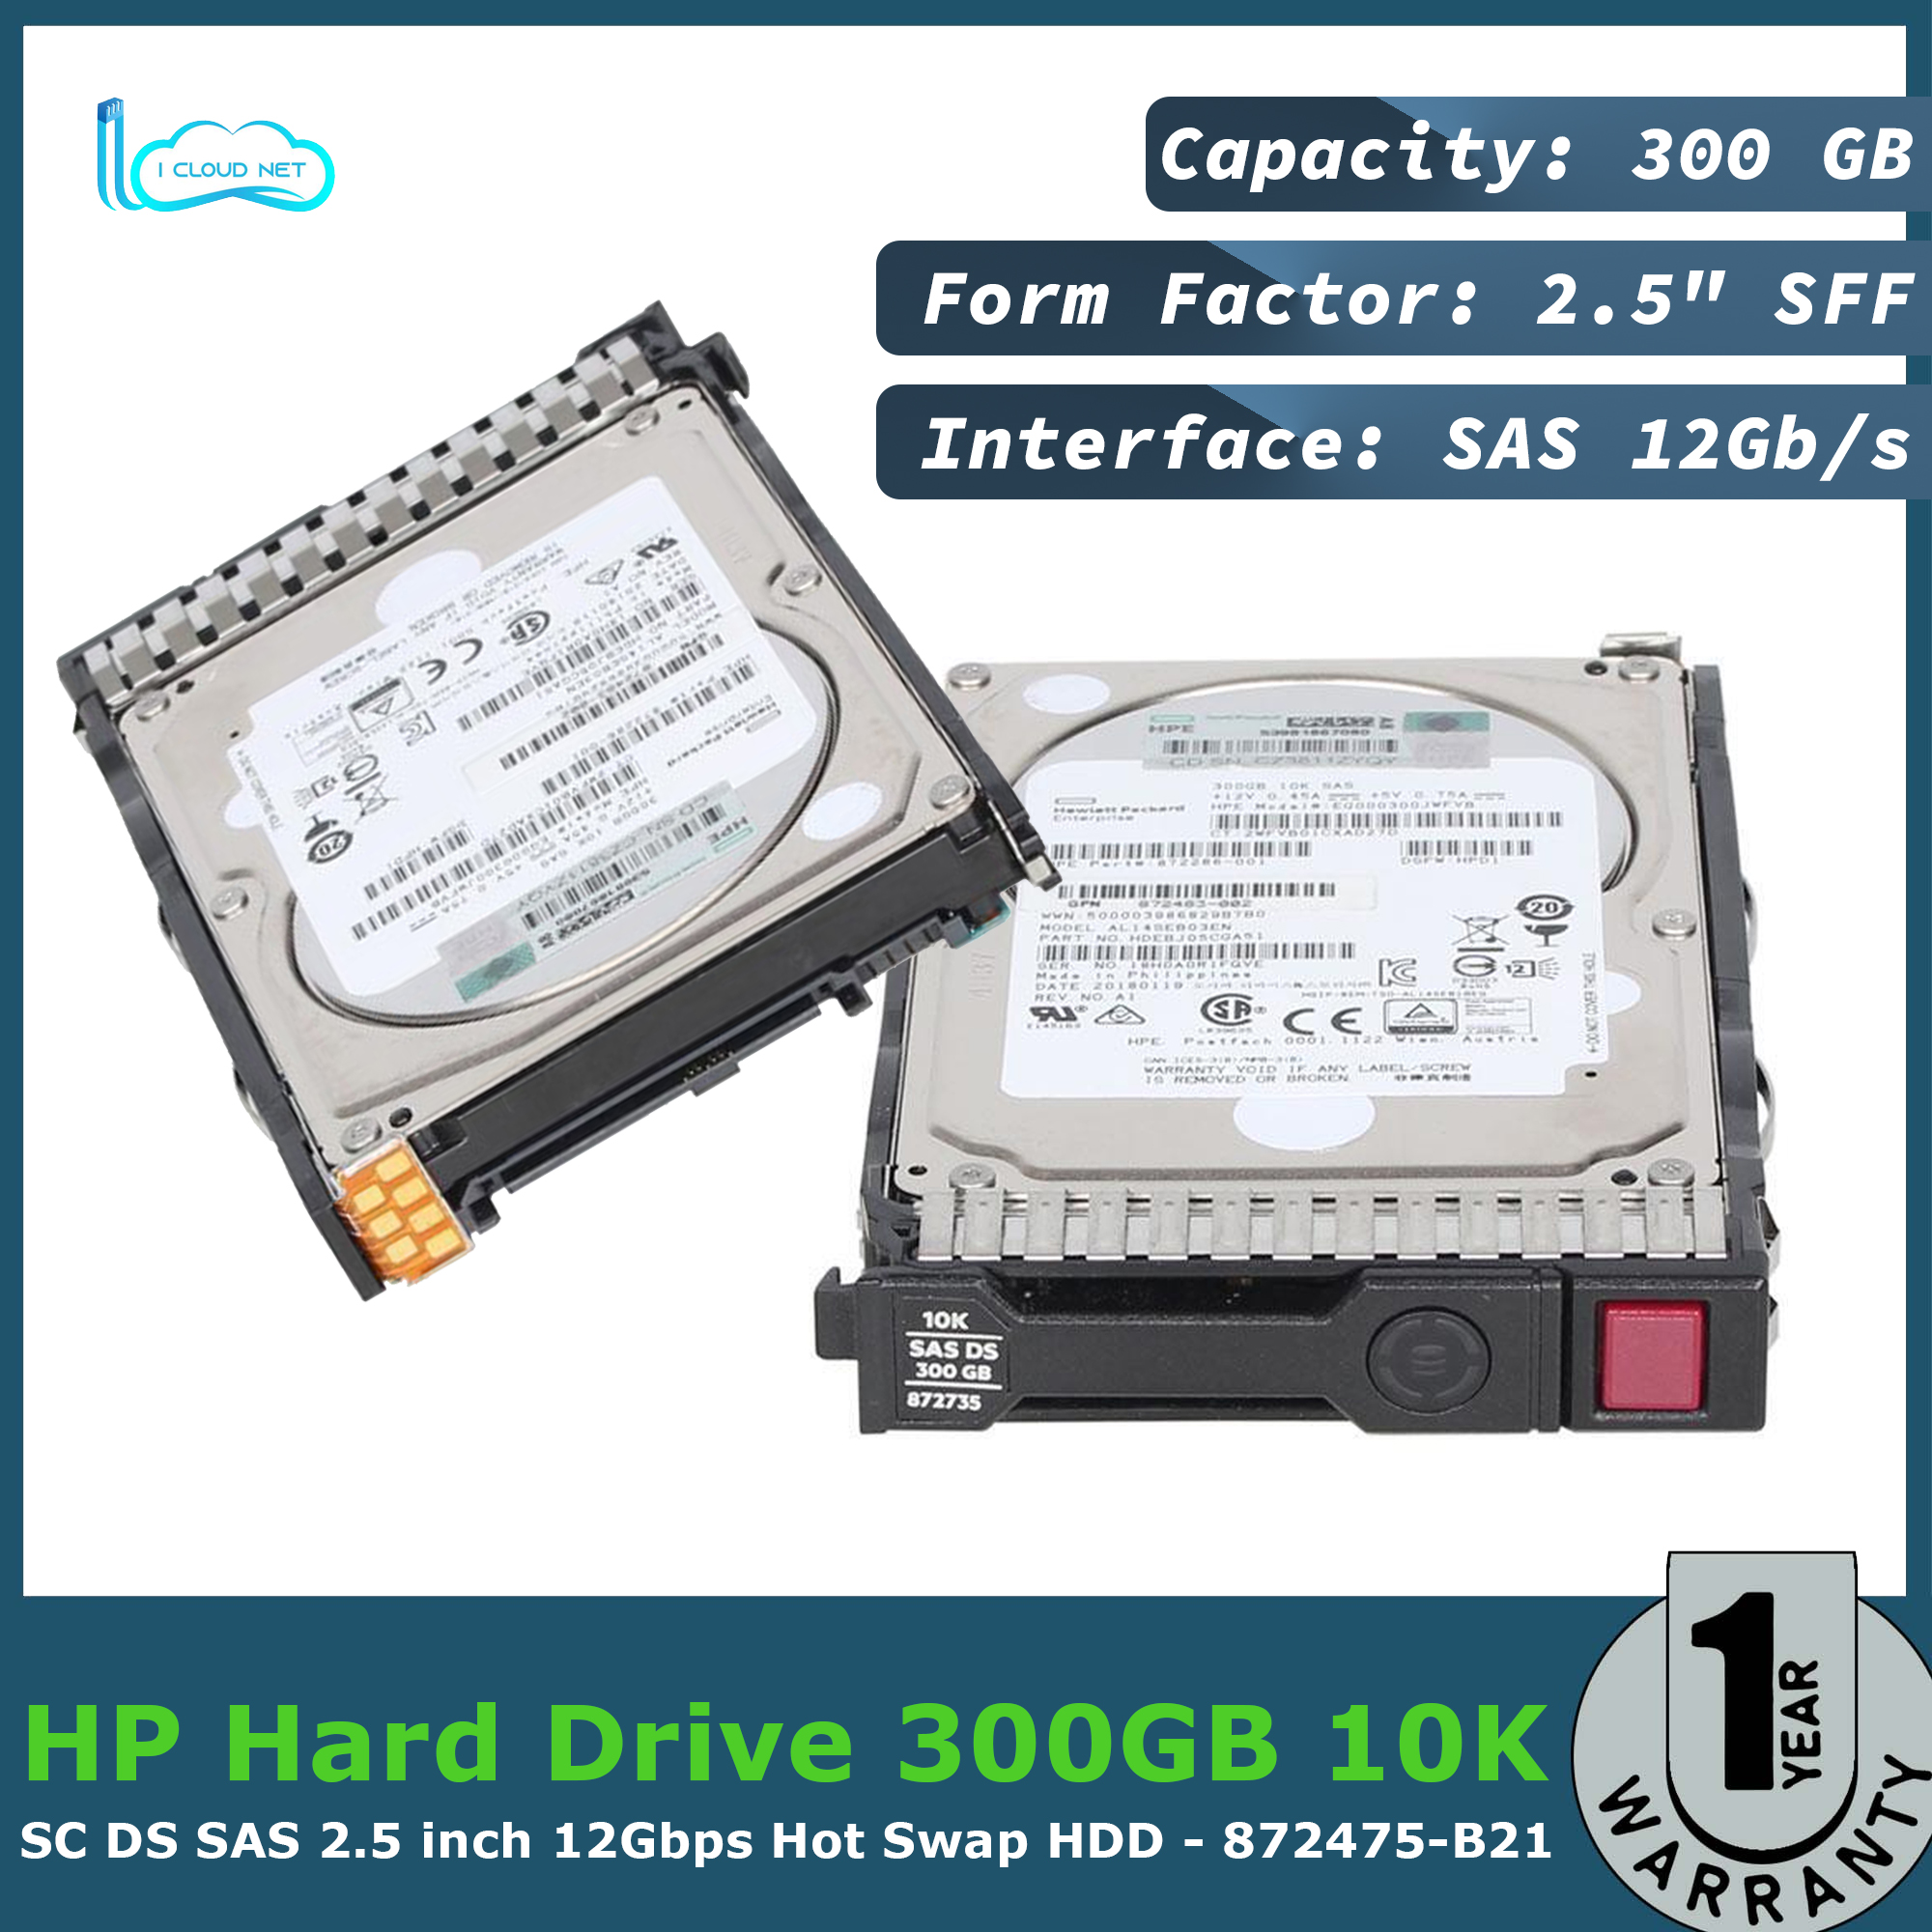 HP Hard Drive 300GB 10K SC DS SAS 2.5 inch 12Gbps Hot Swap HDD